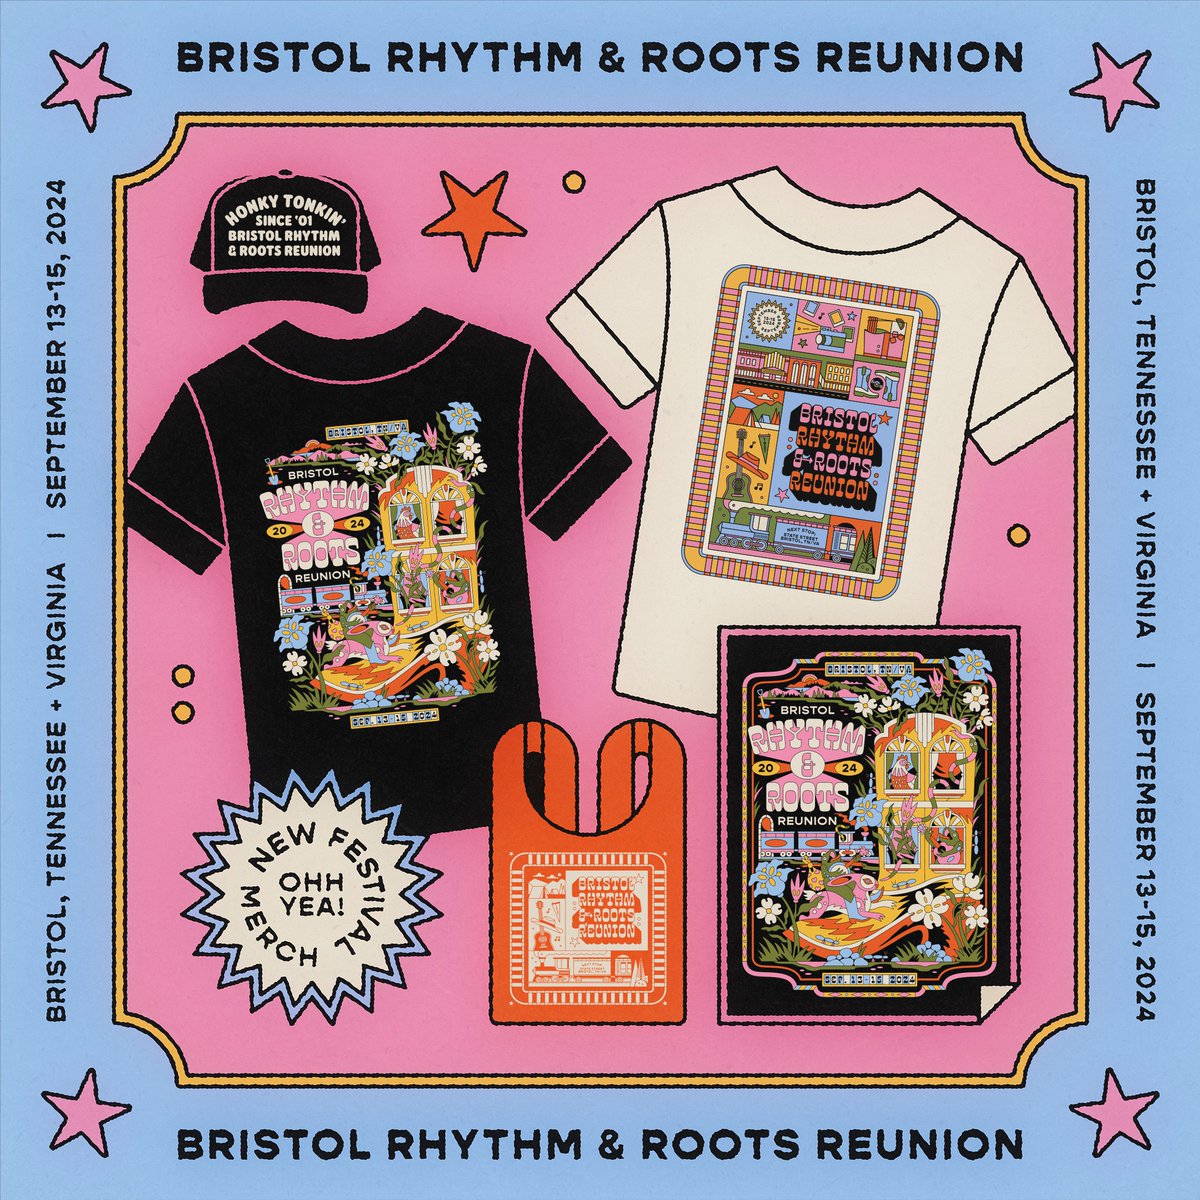 🛍️NEW! NEW! NEW! A whole slew of brand new #BristolRhythm ‘24 merch is available now! 🛒Shop ‘em online at bit.ly/3P16xtD or in-store at the @BCMM!